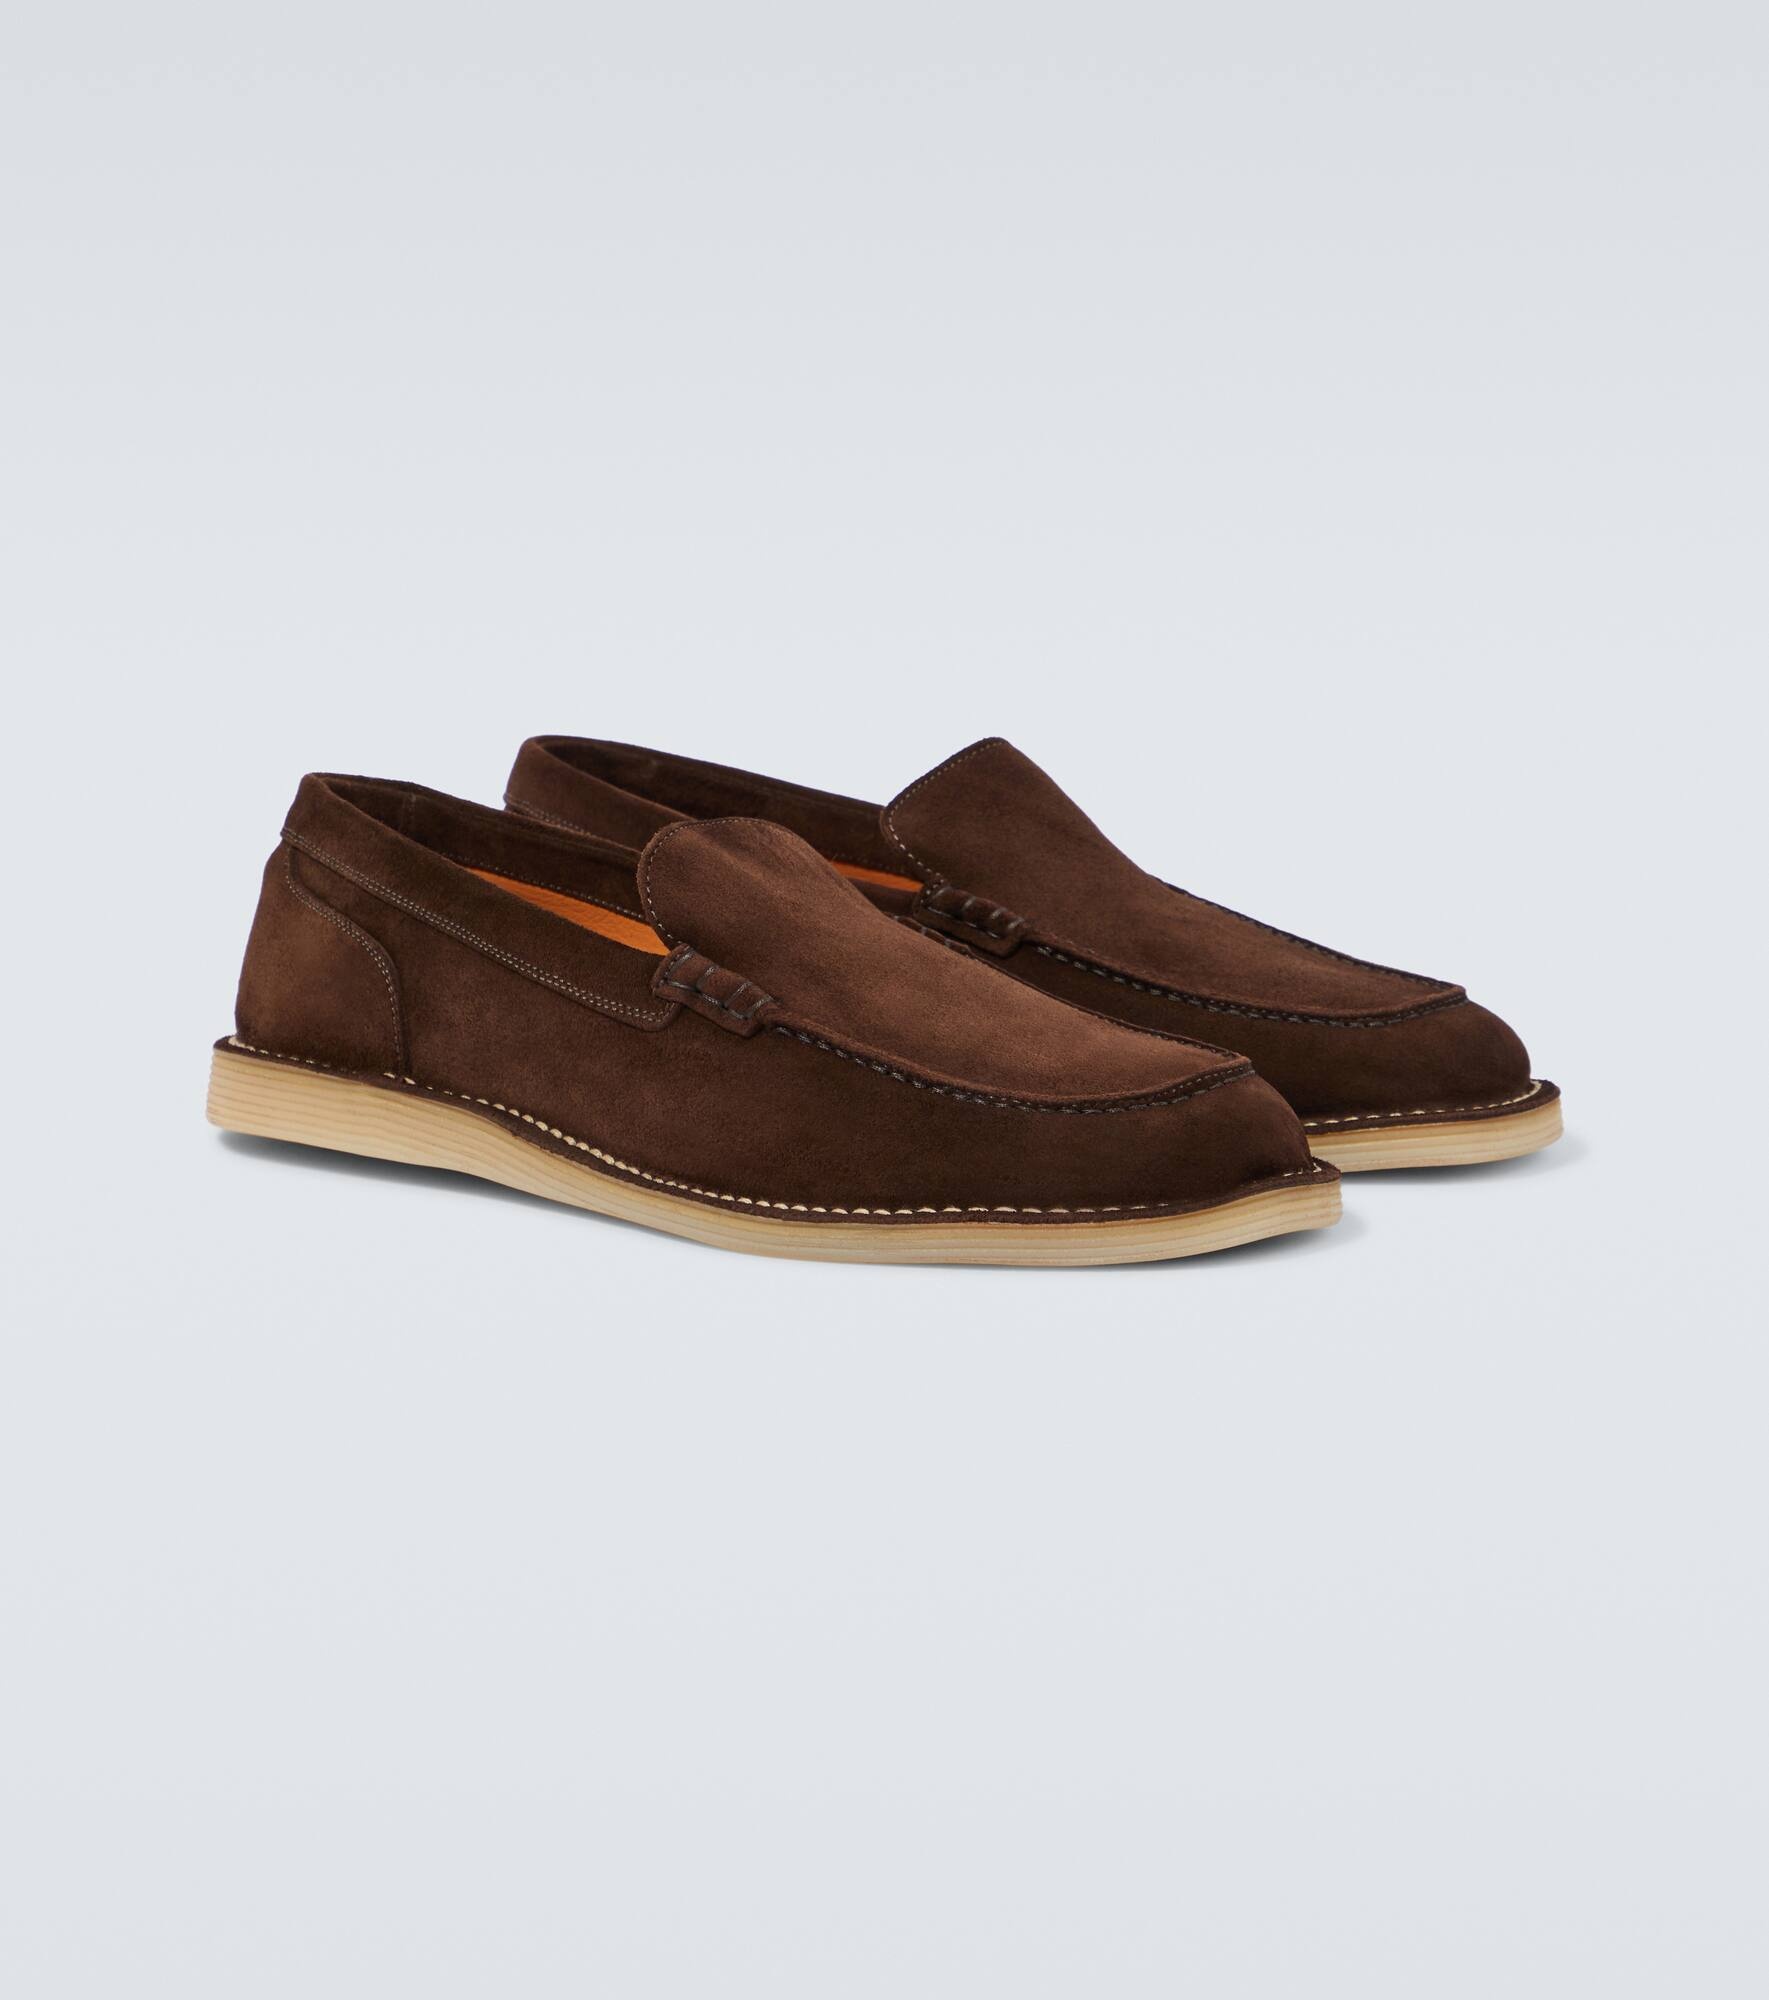 New Florio Ideal suede loafers - 5